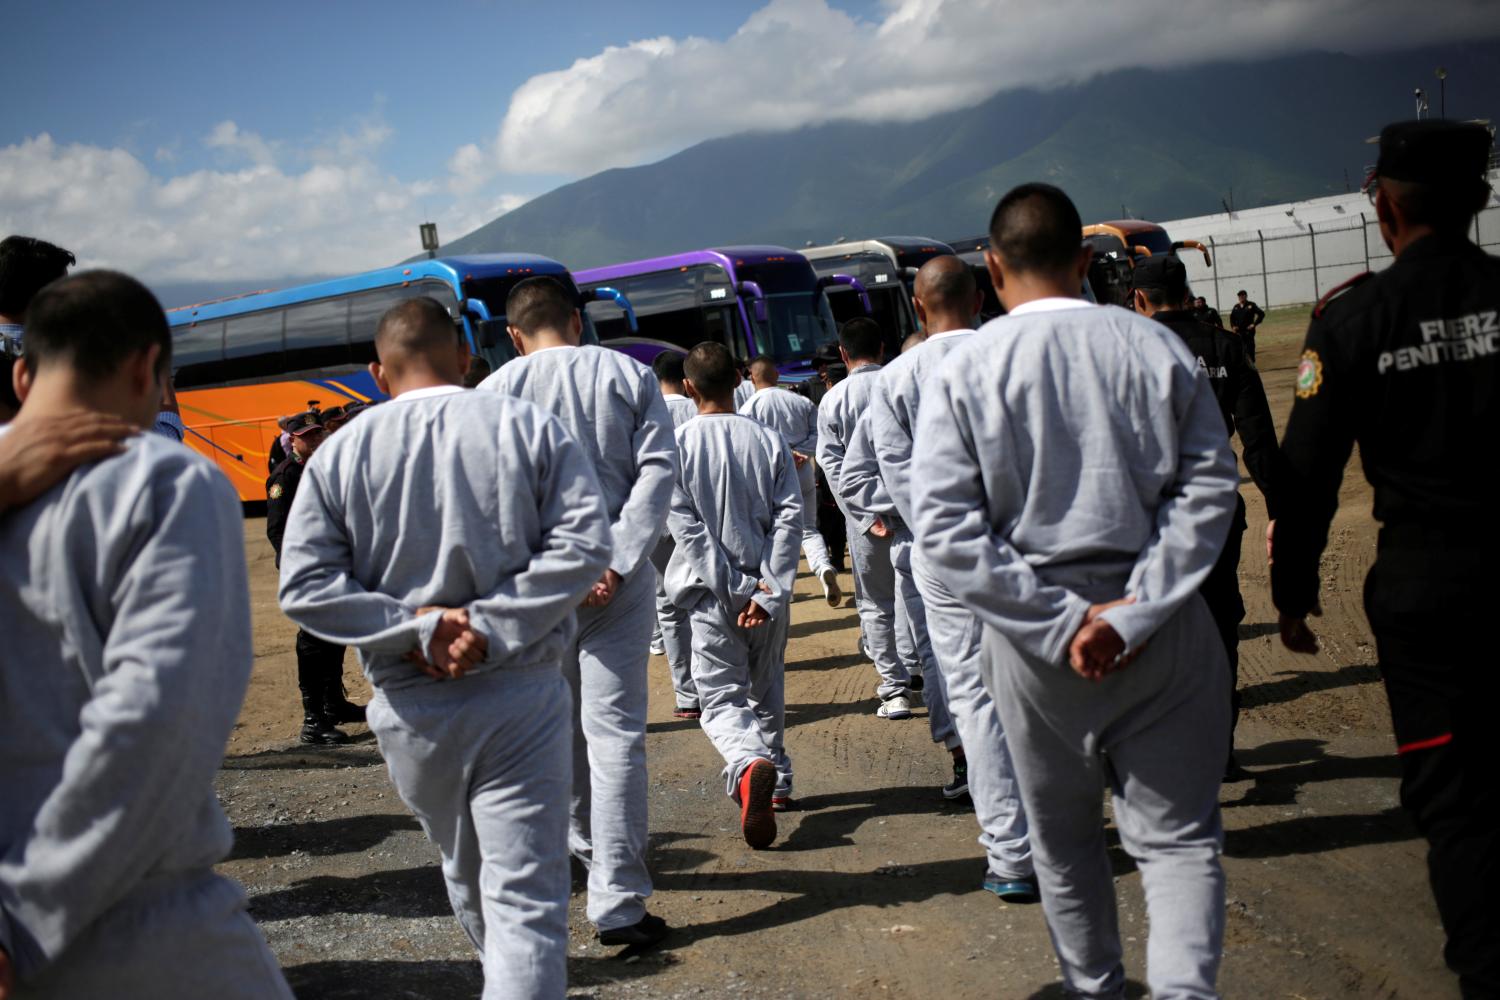 The last inmates of the Topo Chico prison, which will be converted into a public park, are transferred to a new prison in Apodaca, during a closing ceremony in Monterrey, Mexico, September 30, 2019. Picture taken September 30, 2019. REUTERS/Daniel Becerril